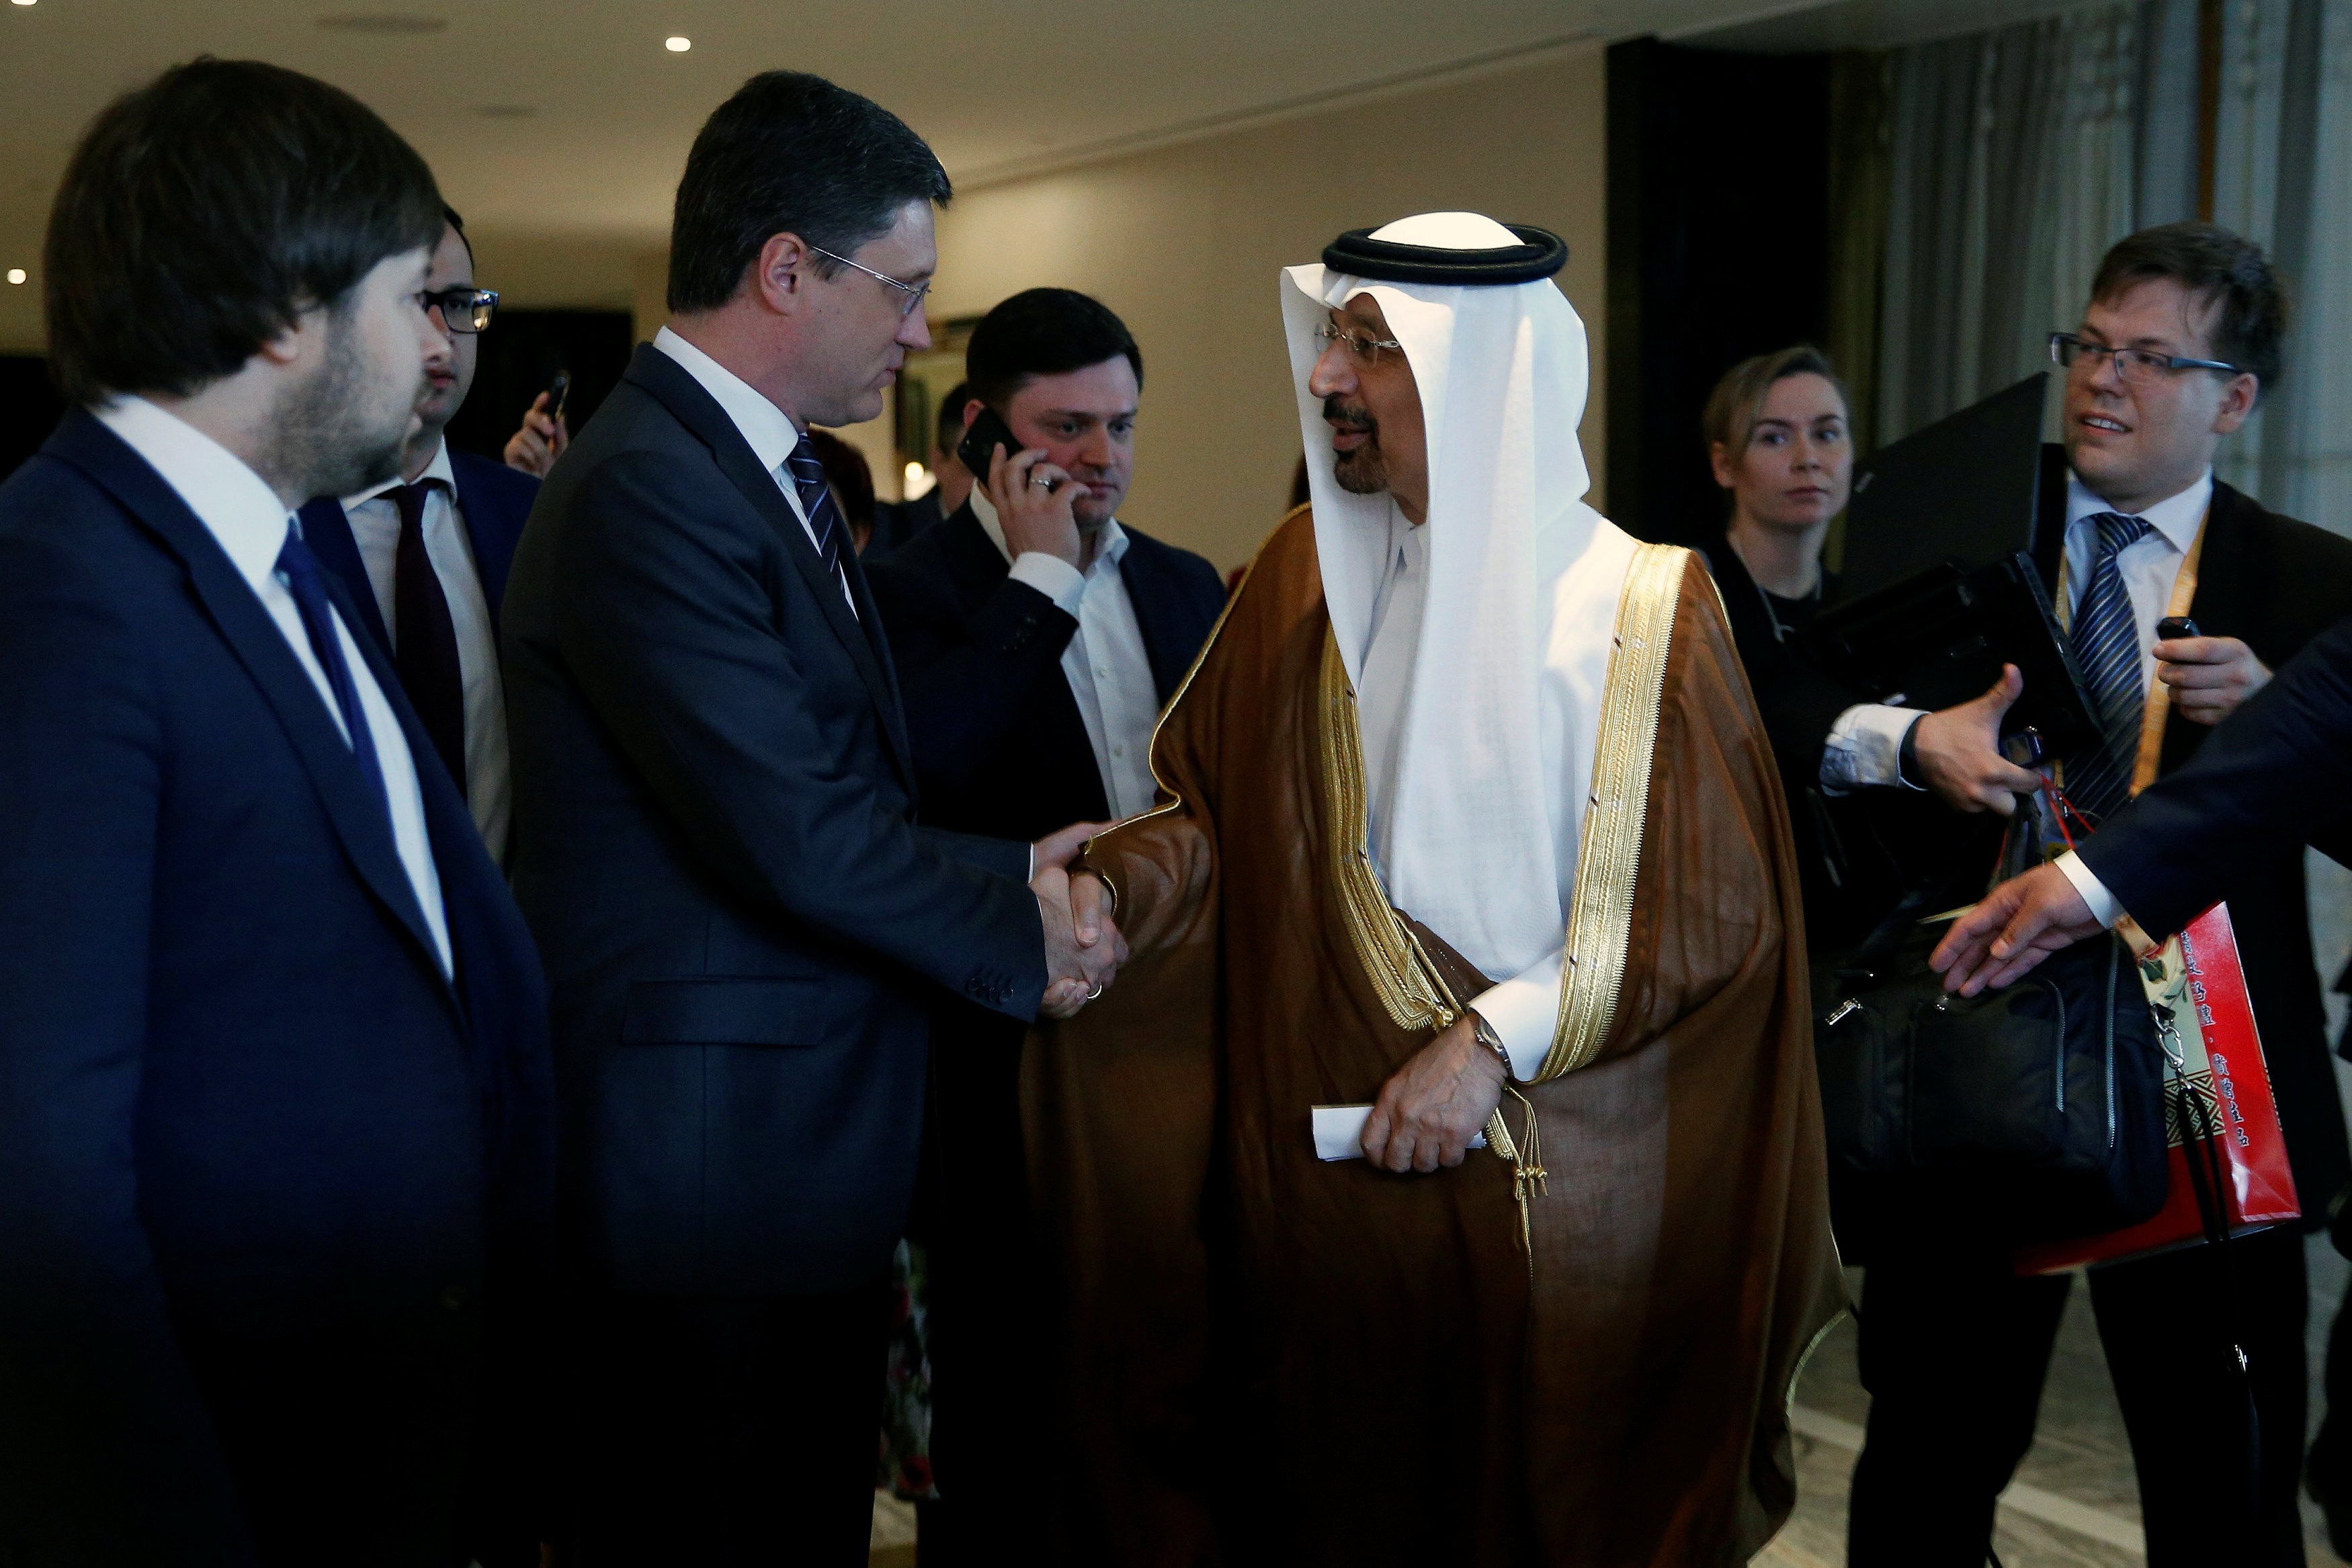 Saudi Arabia's Energy Minister Khalid al-Falih and Russia's Energy Minister Alexander Novak shake hands after a joint briefing in Beijing, China, as an OPEC meeting next week is expected to extend production cuts into 2018. Photo: Reuters